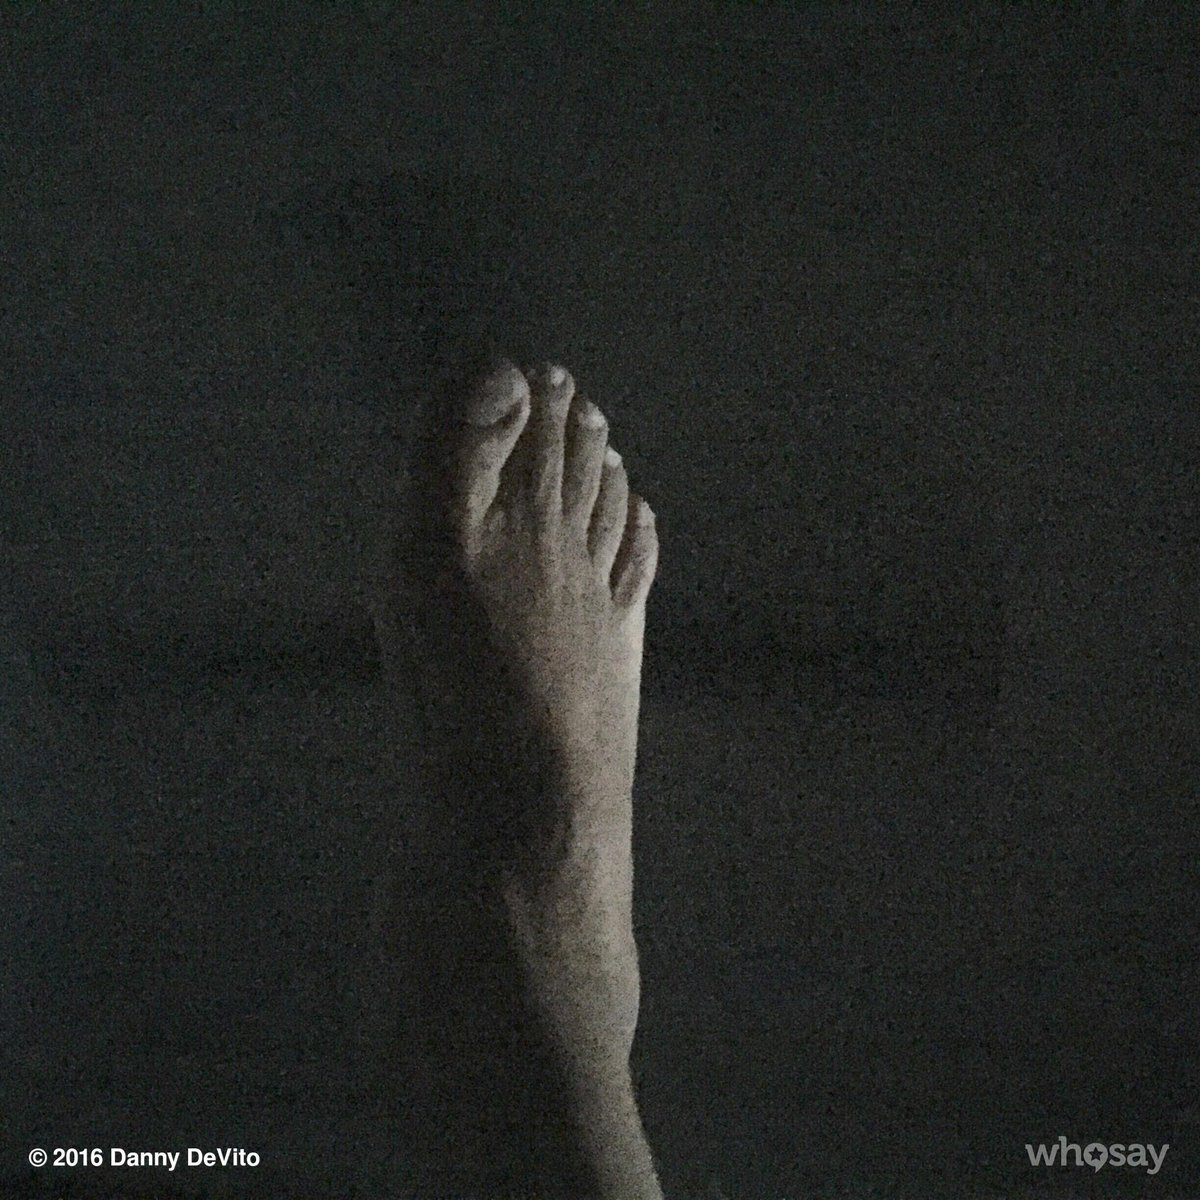 #Trollfoot at peace https://t.co/Yau58iStrF